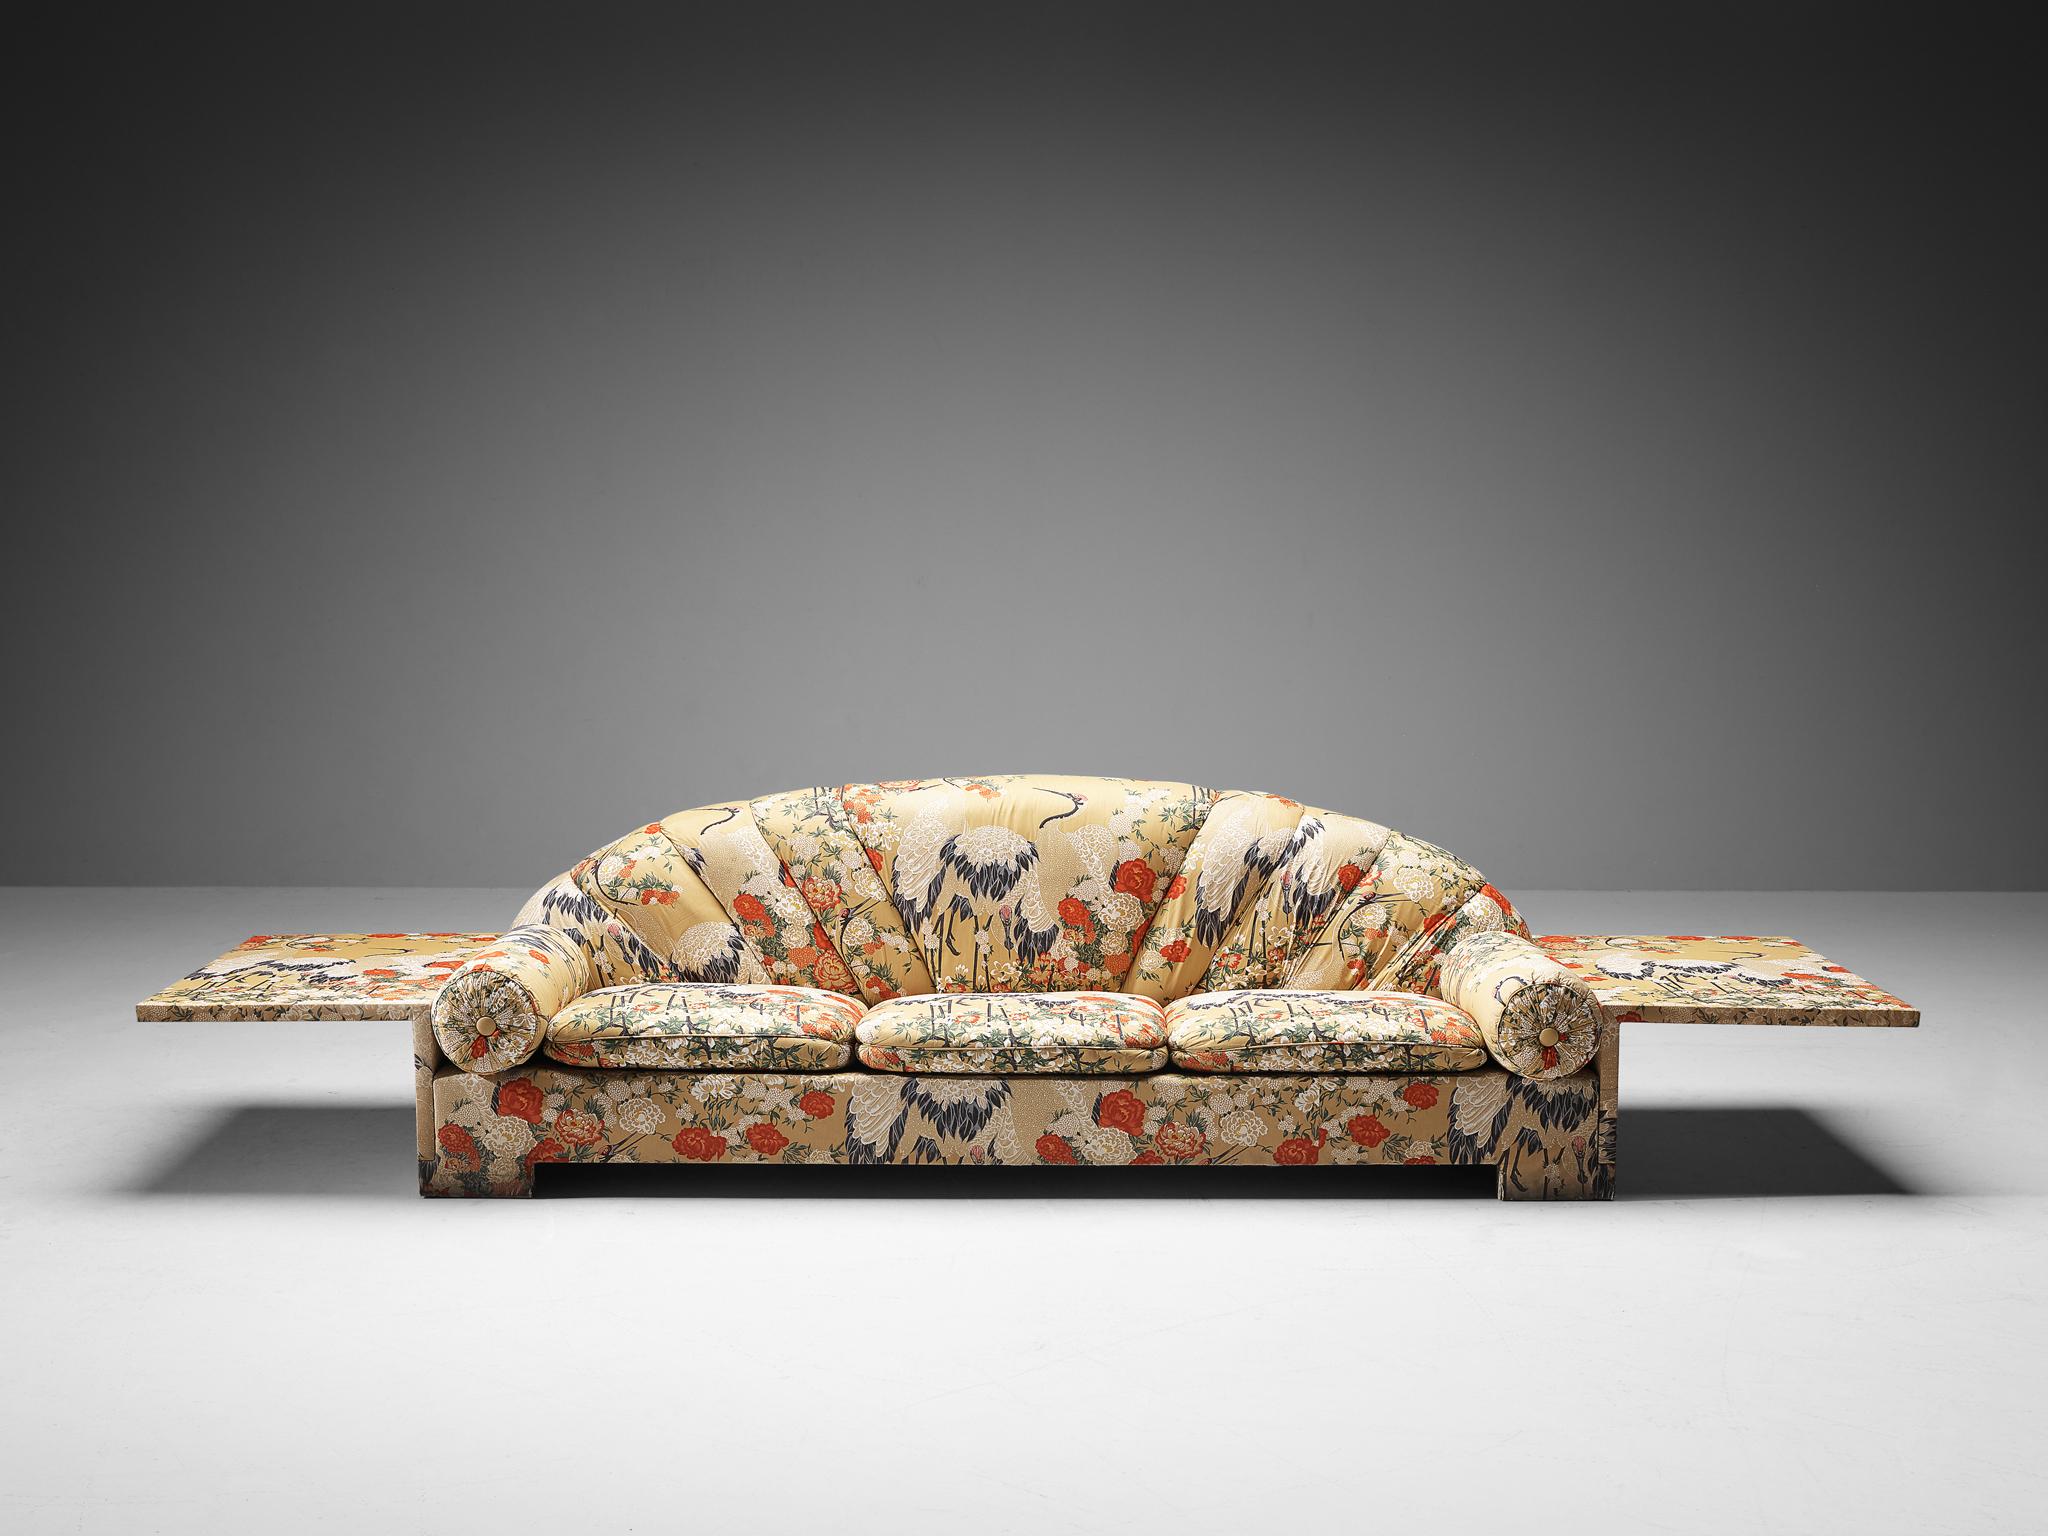 Sofa, fabric, Italy, 1980s.

A graceful sofa that has an unconventional construction based on voluminous forms and pronounced lines. This piece is defined by its geometric layout as the back embodies a semi-circular shape and the seat and side